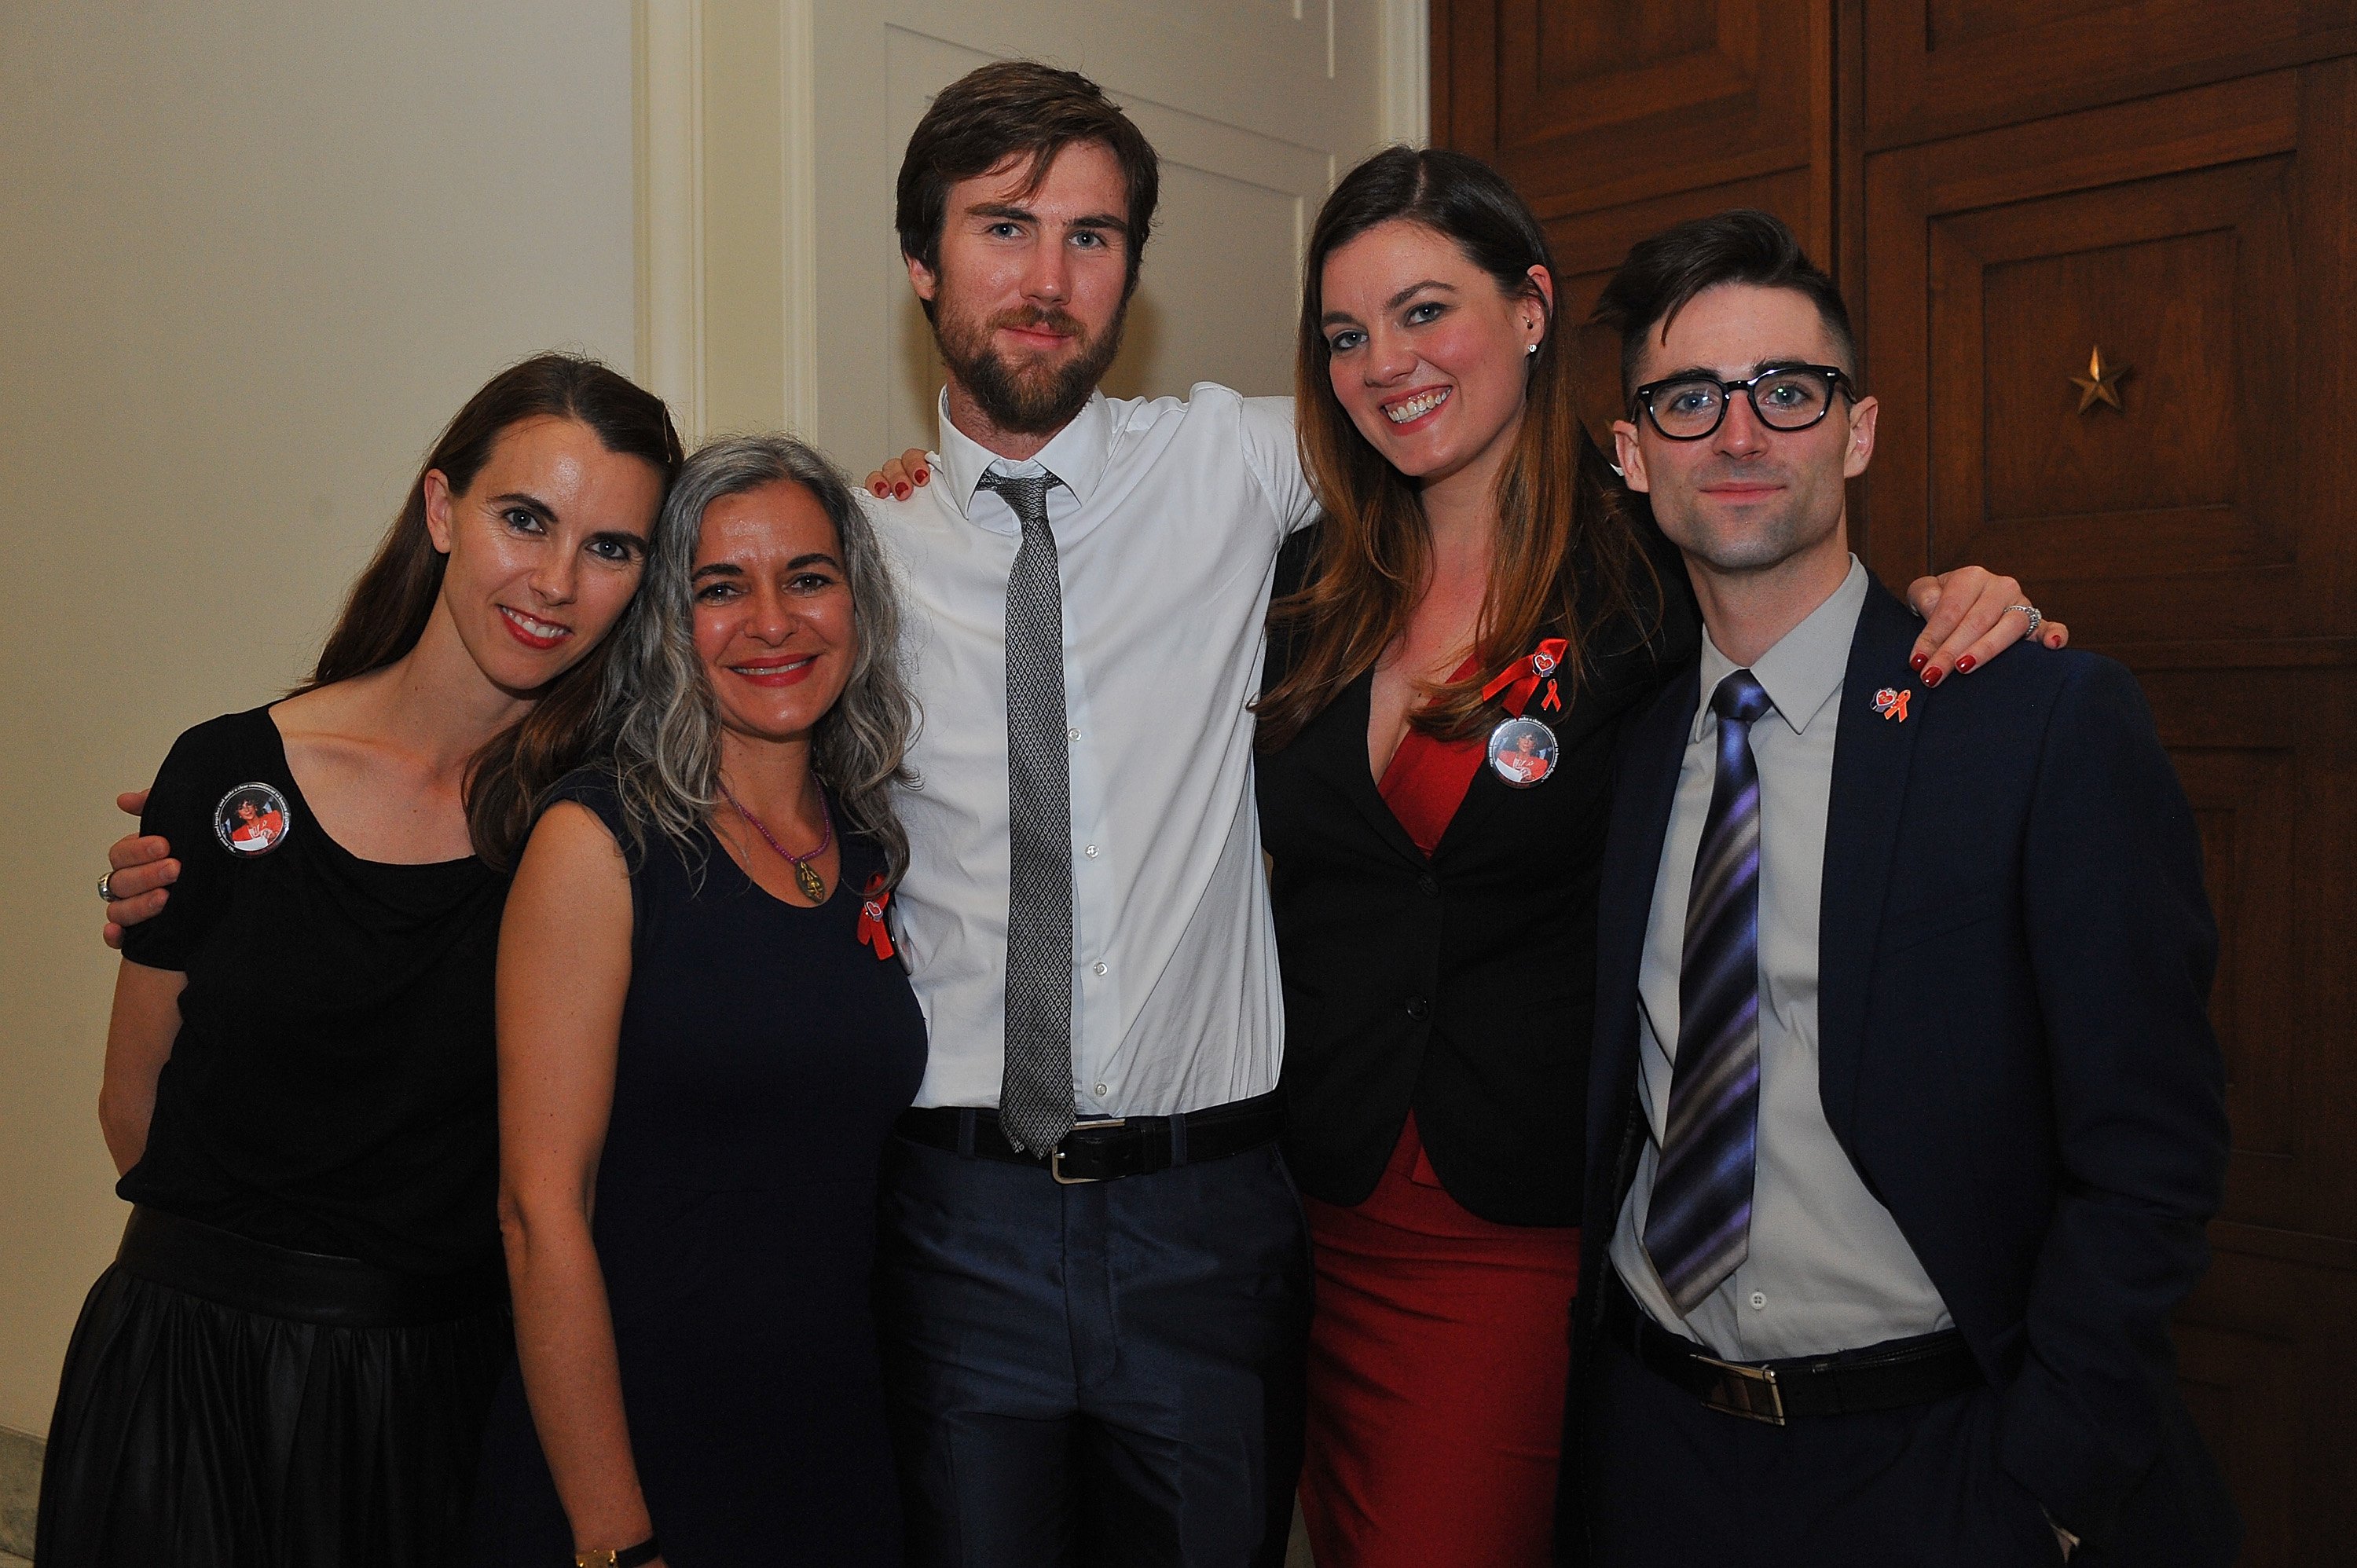  Naomi deLuce Wilding, Laela Wilding, Tarquin Wilding, Eliza Carson and Quinn Tivey at the Rayburn House Office Building on April 13, 2015 in Washington, DC | Source: Getty Images